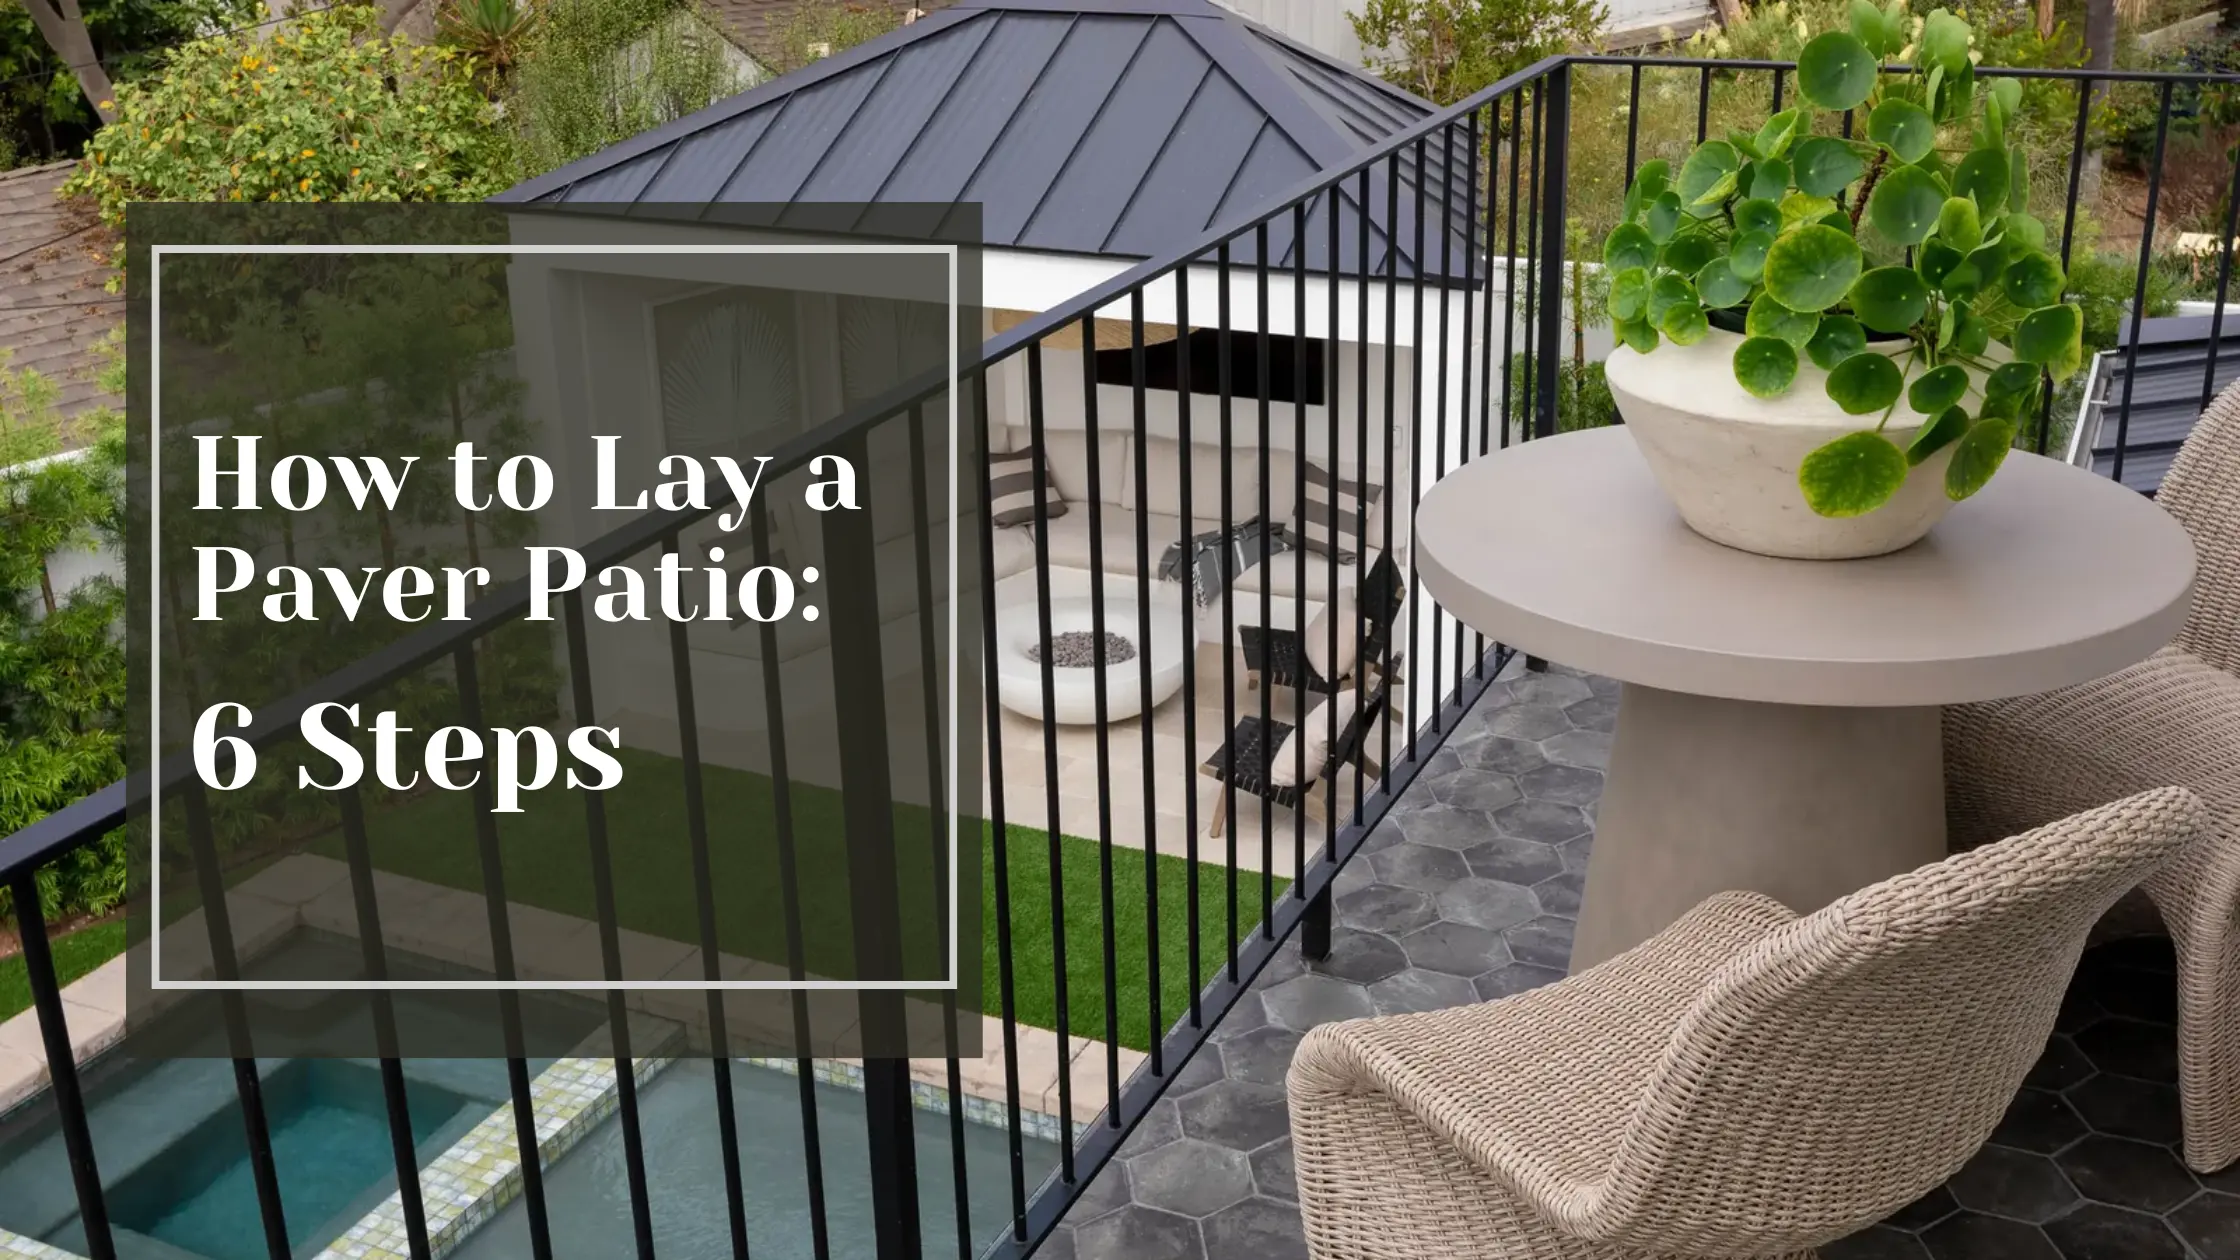 How to Lay a Paver Patio: 6 Steps